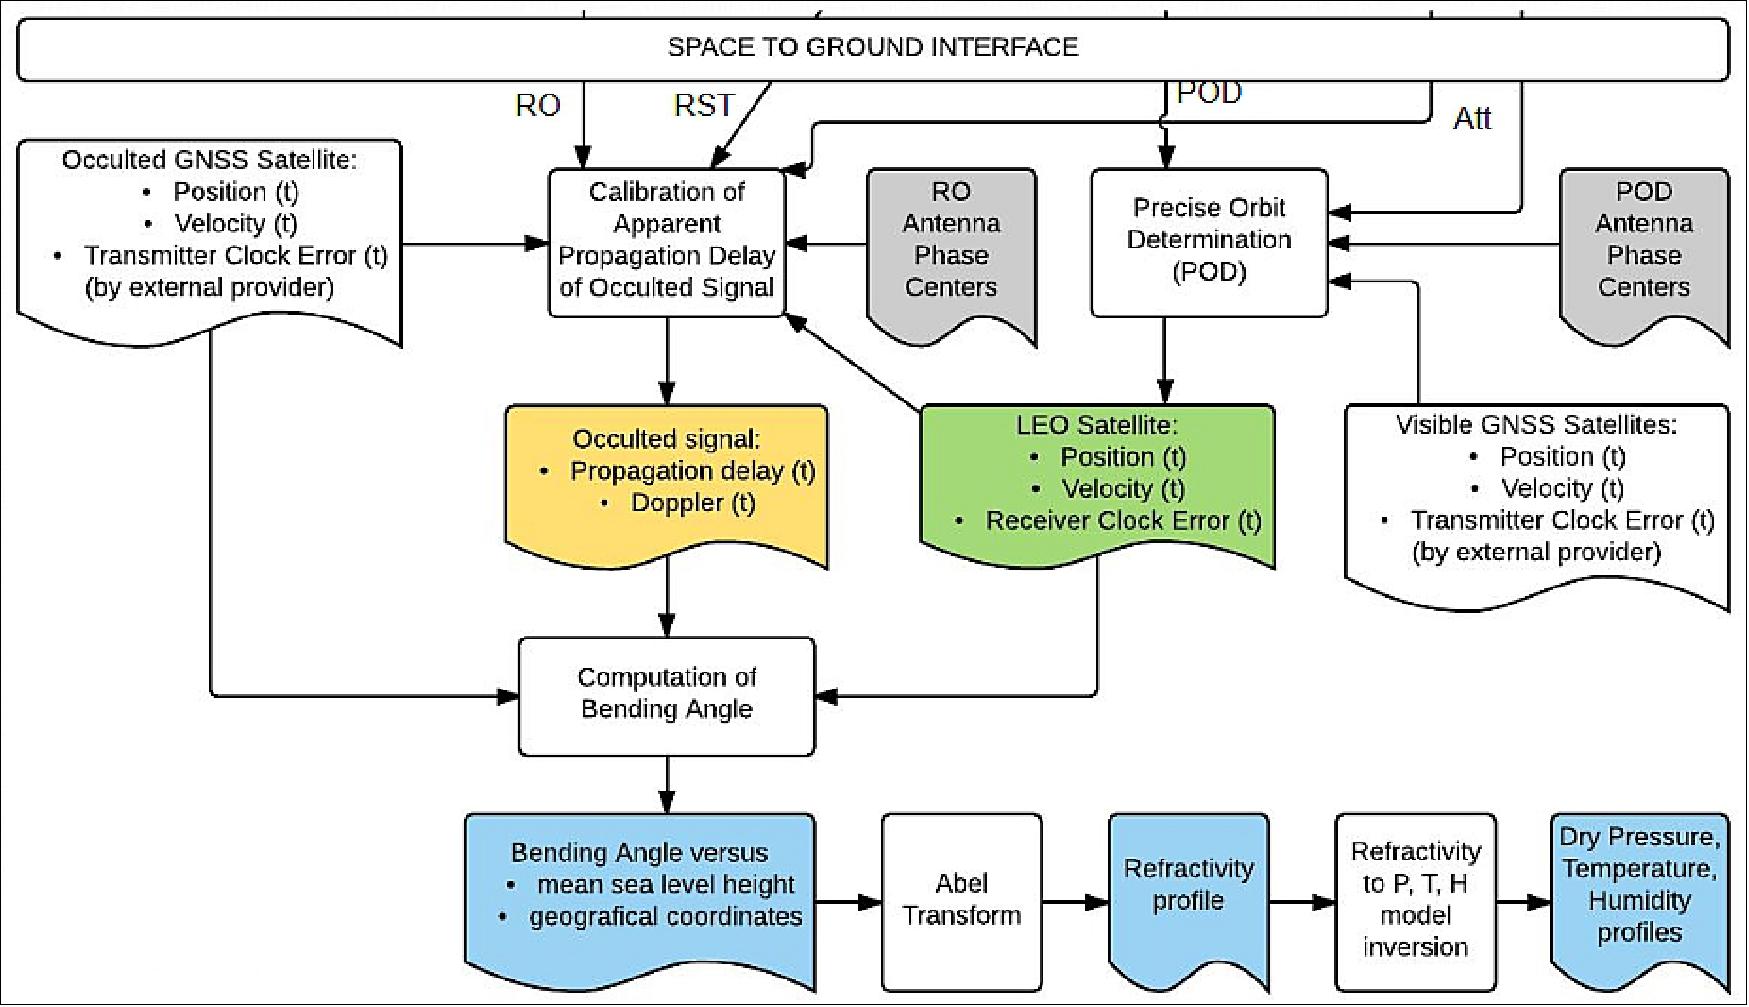 Figure 21: Spire science GNSS-RO processing (image credit: Spire Global)